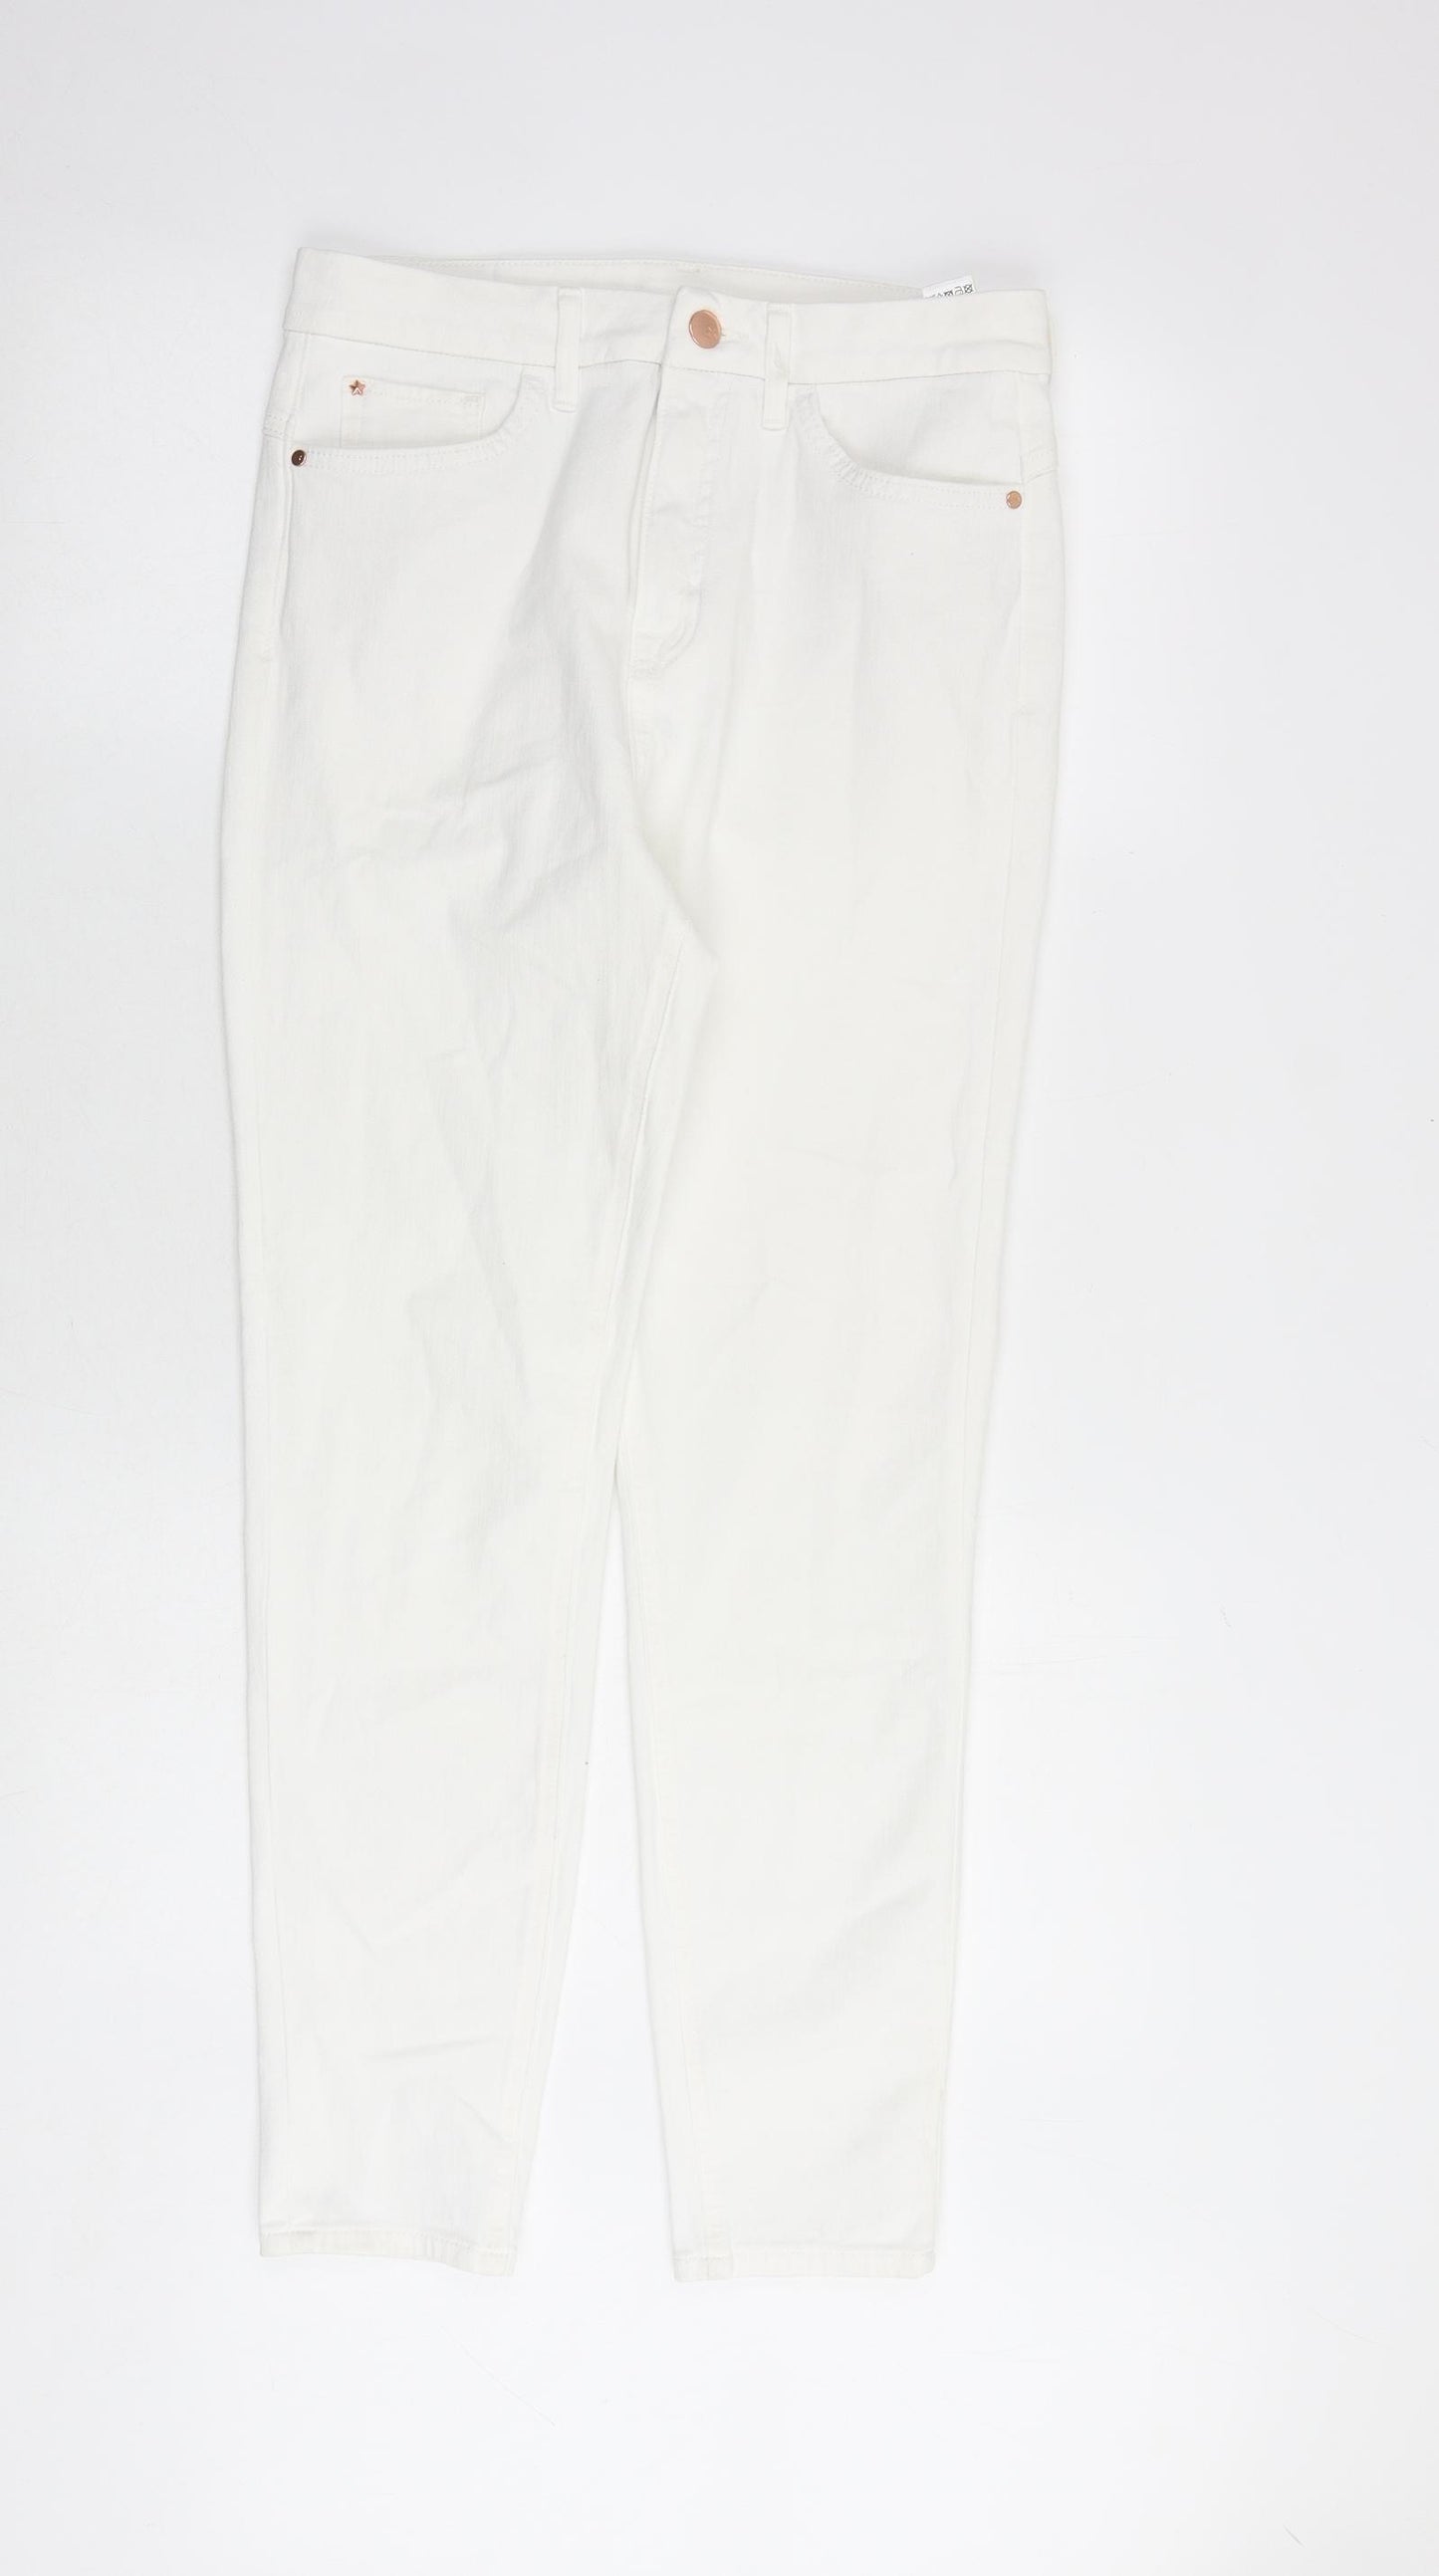 Marks and Spencer Womens White Cotton Skinny Jeans Size 12 Regular Zip